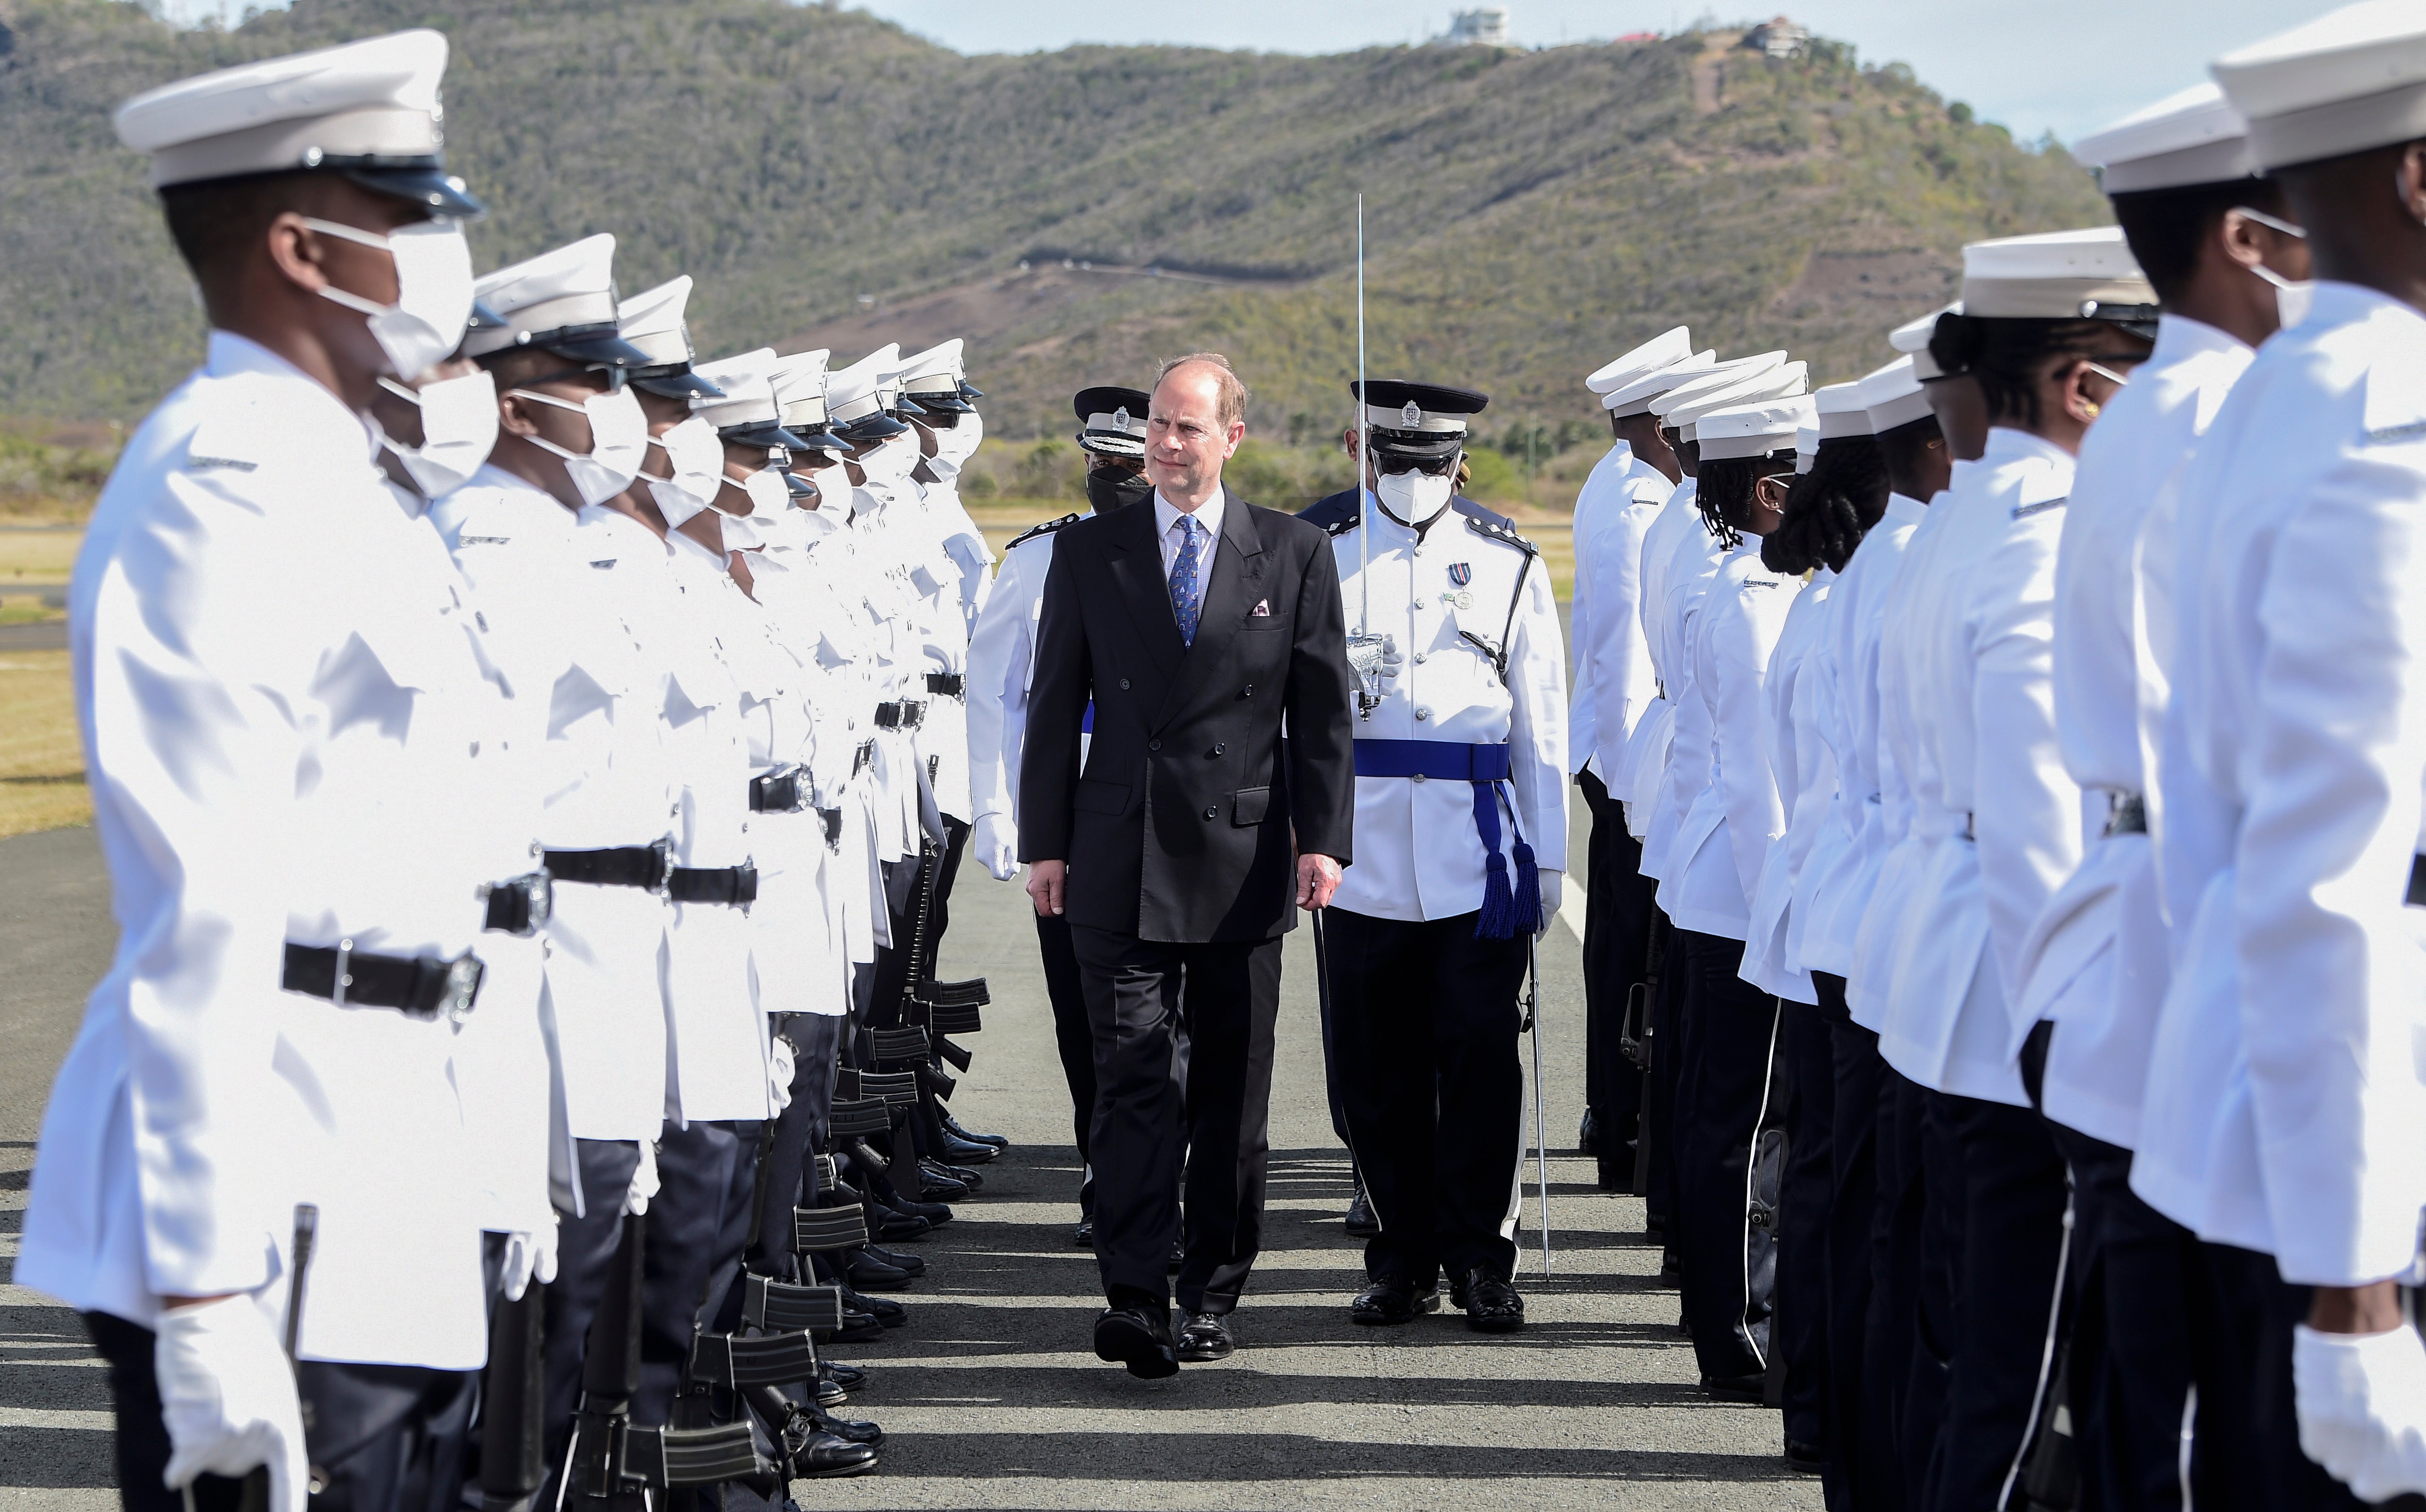 Edward observes a Guard of Honour at Hewanorra International Airport in Vieux Fort, Saint Lucia